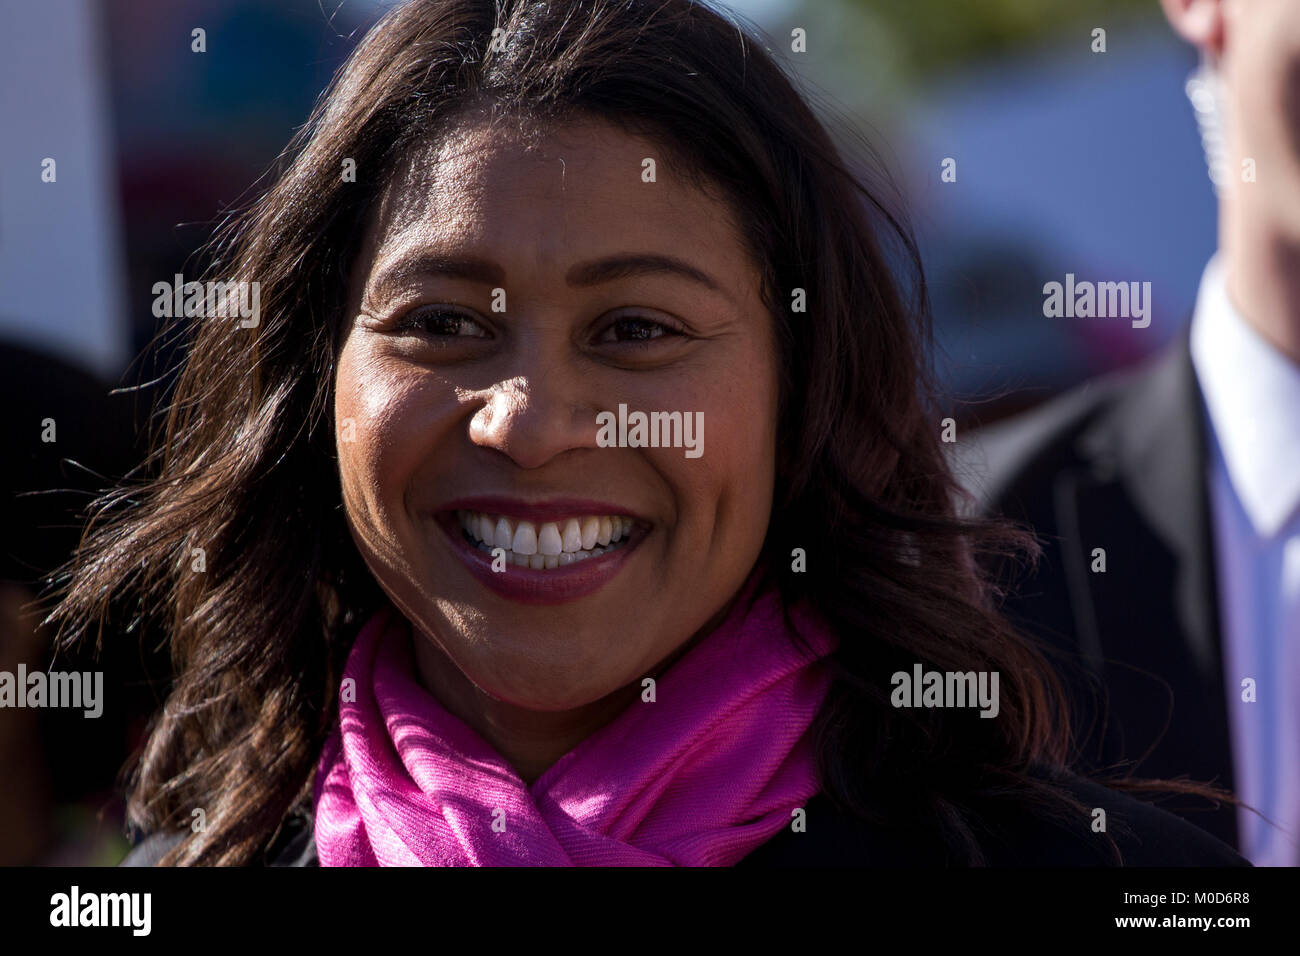 San Francisco, California, USA. 20th Jan, 2018. Acting Mayor LONDON BREED attends the Women's March in San Francisco, California. Credit: Joel Angel Juarez/ZUMA Wire/Alamy Live News Stock Photo